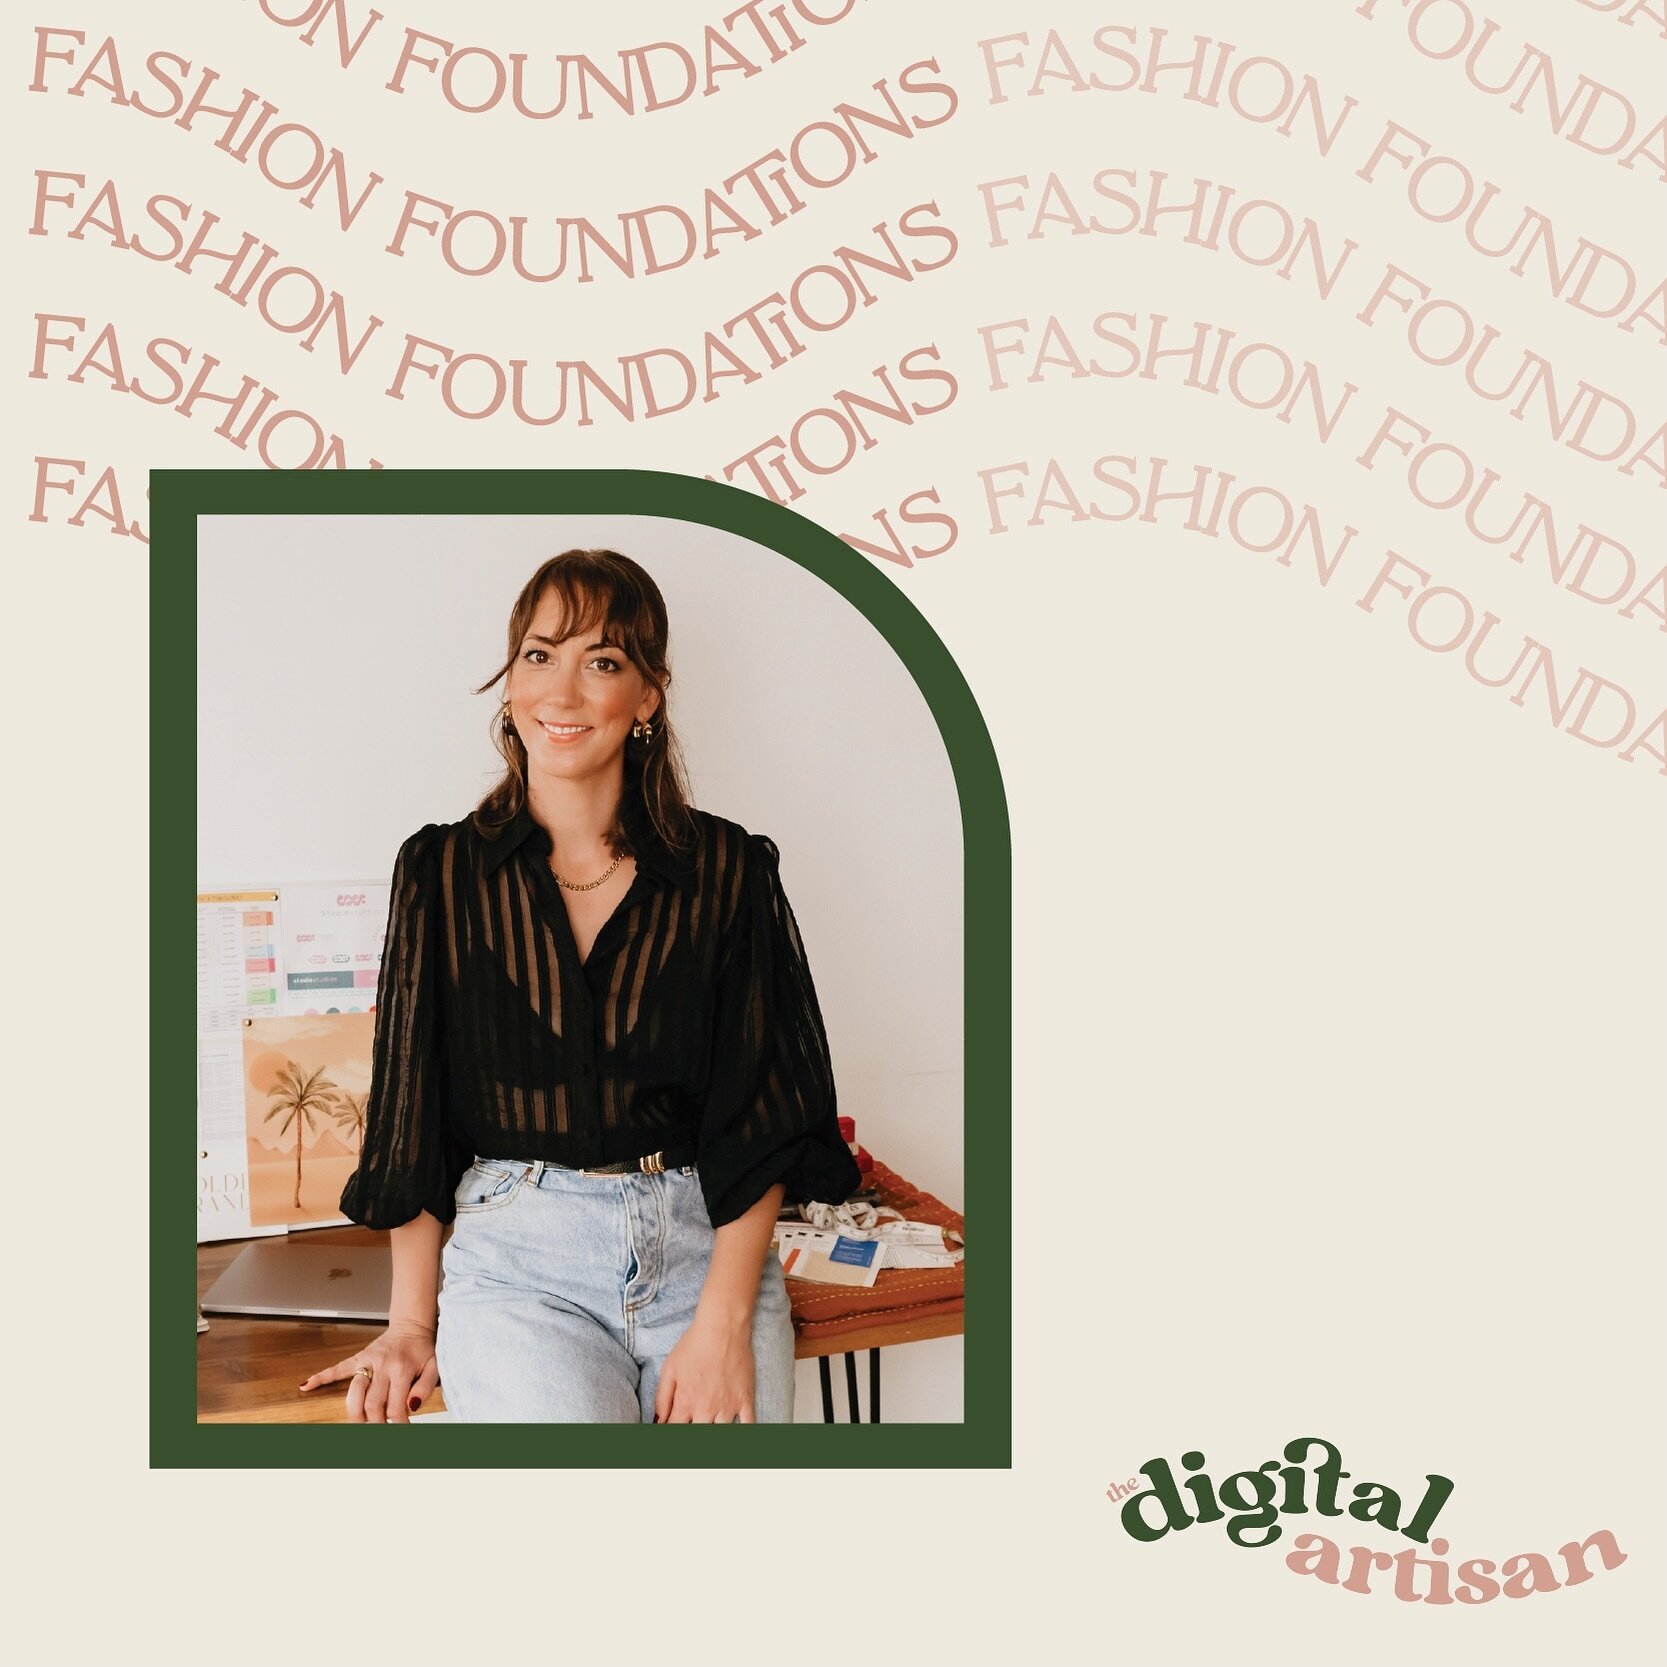 Building a fashion business is tough 😫

Especially when you haven&rsquo;t a clue about the business side of things like email marketing or Shopify?

That hasn&rsquo;t stopped you yet, but you know at some point you will most likely need to get on to